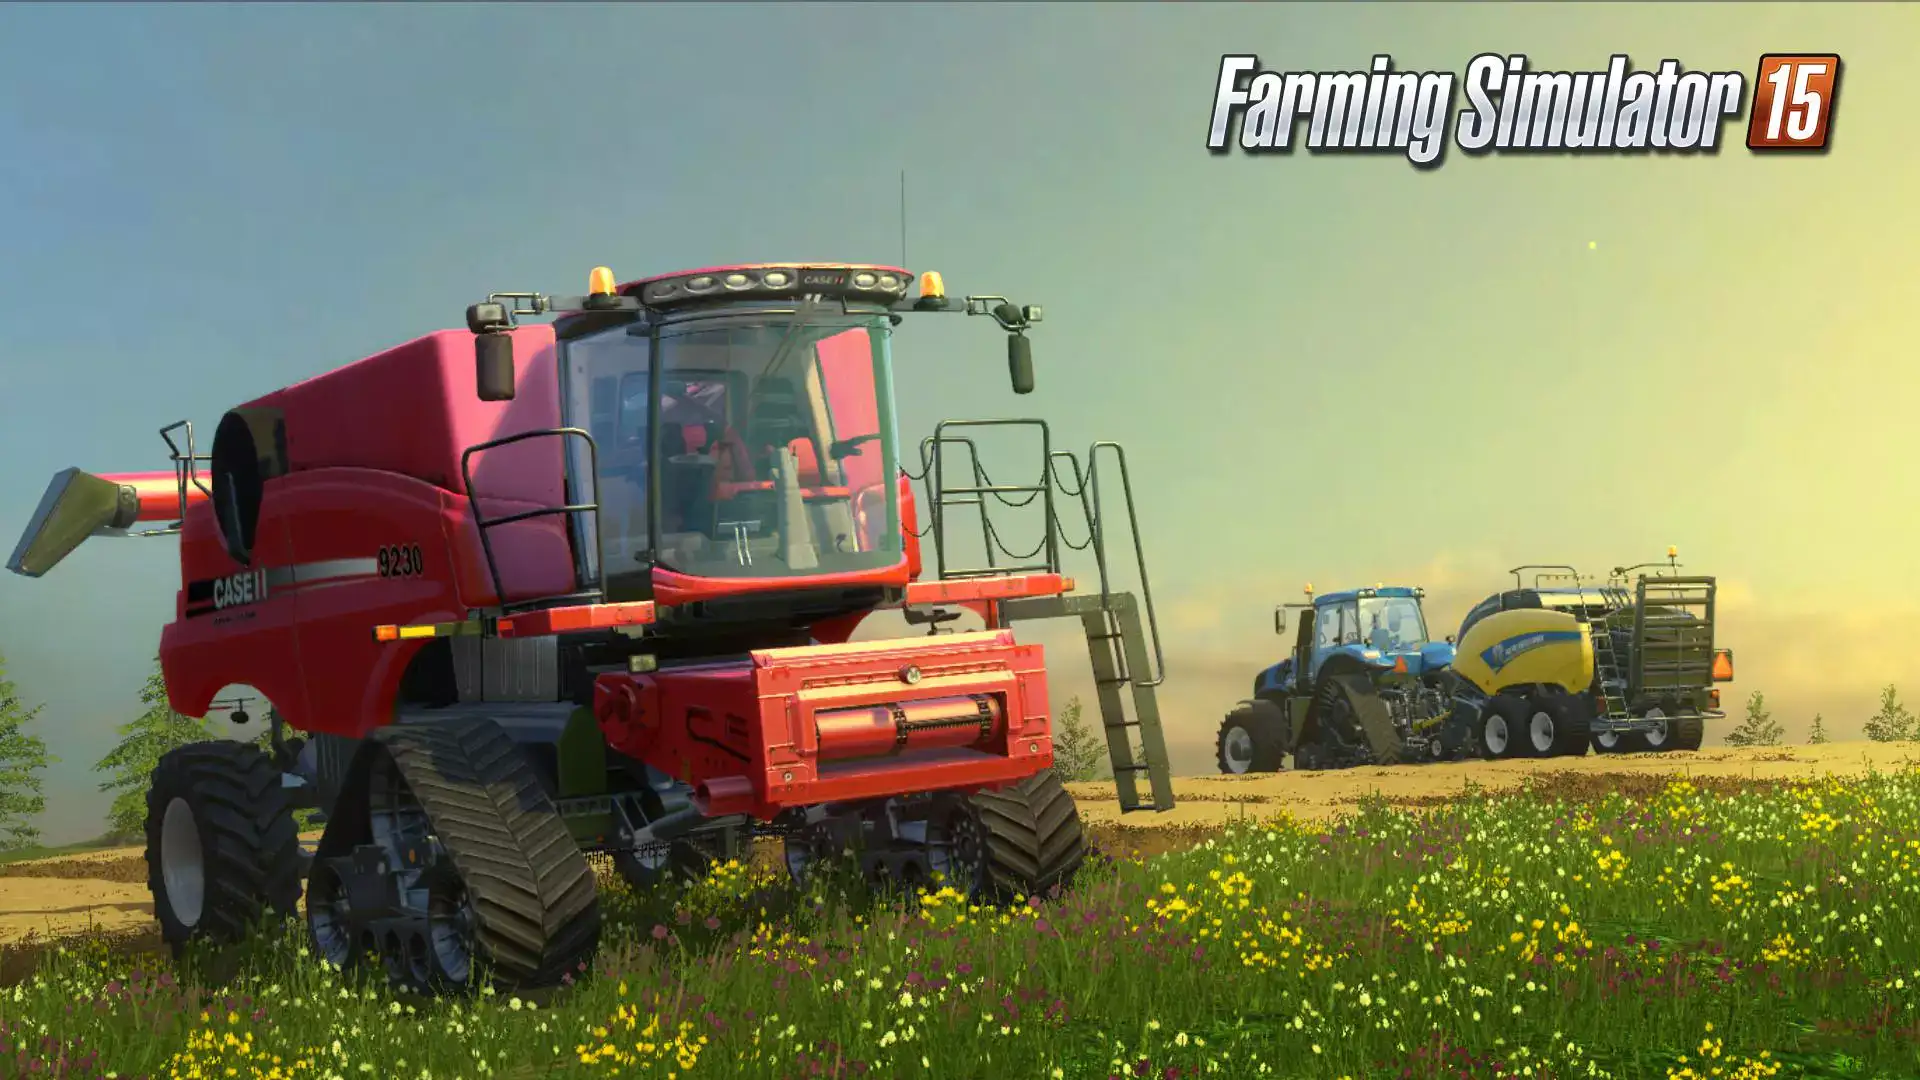 Featured - How To Choose the Right Equipment in Farming Simulator 23 (Complete Guide)